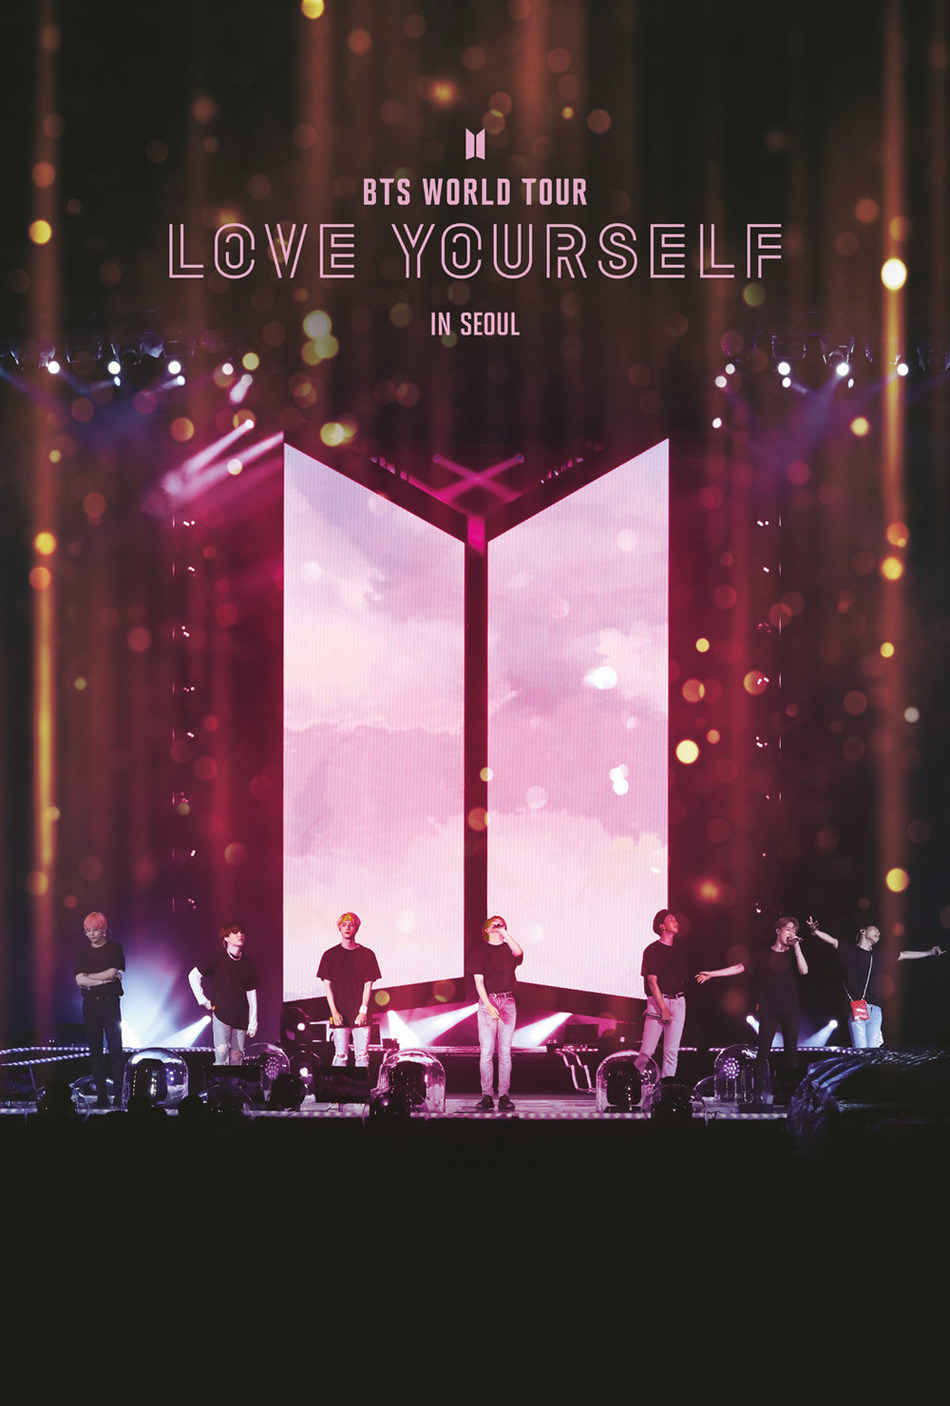 Bts Love Yourself Tour Commentary 'BTS WORLD TOUR LOVE YOURSELF IN SEOUL' Brings Full Concert From Global Supergroup BTS to